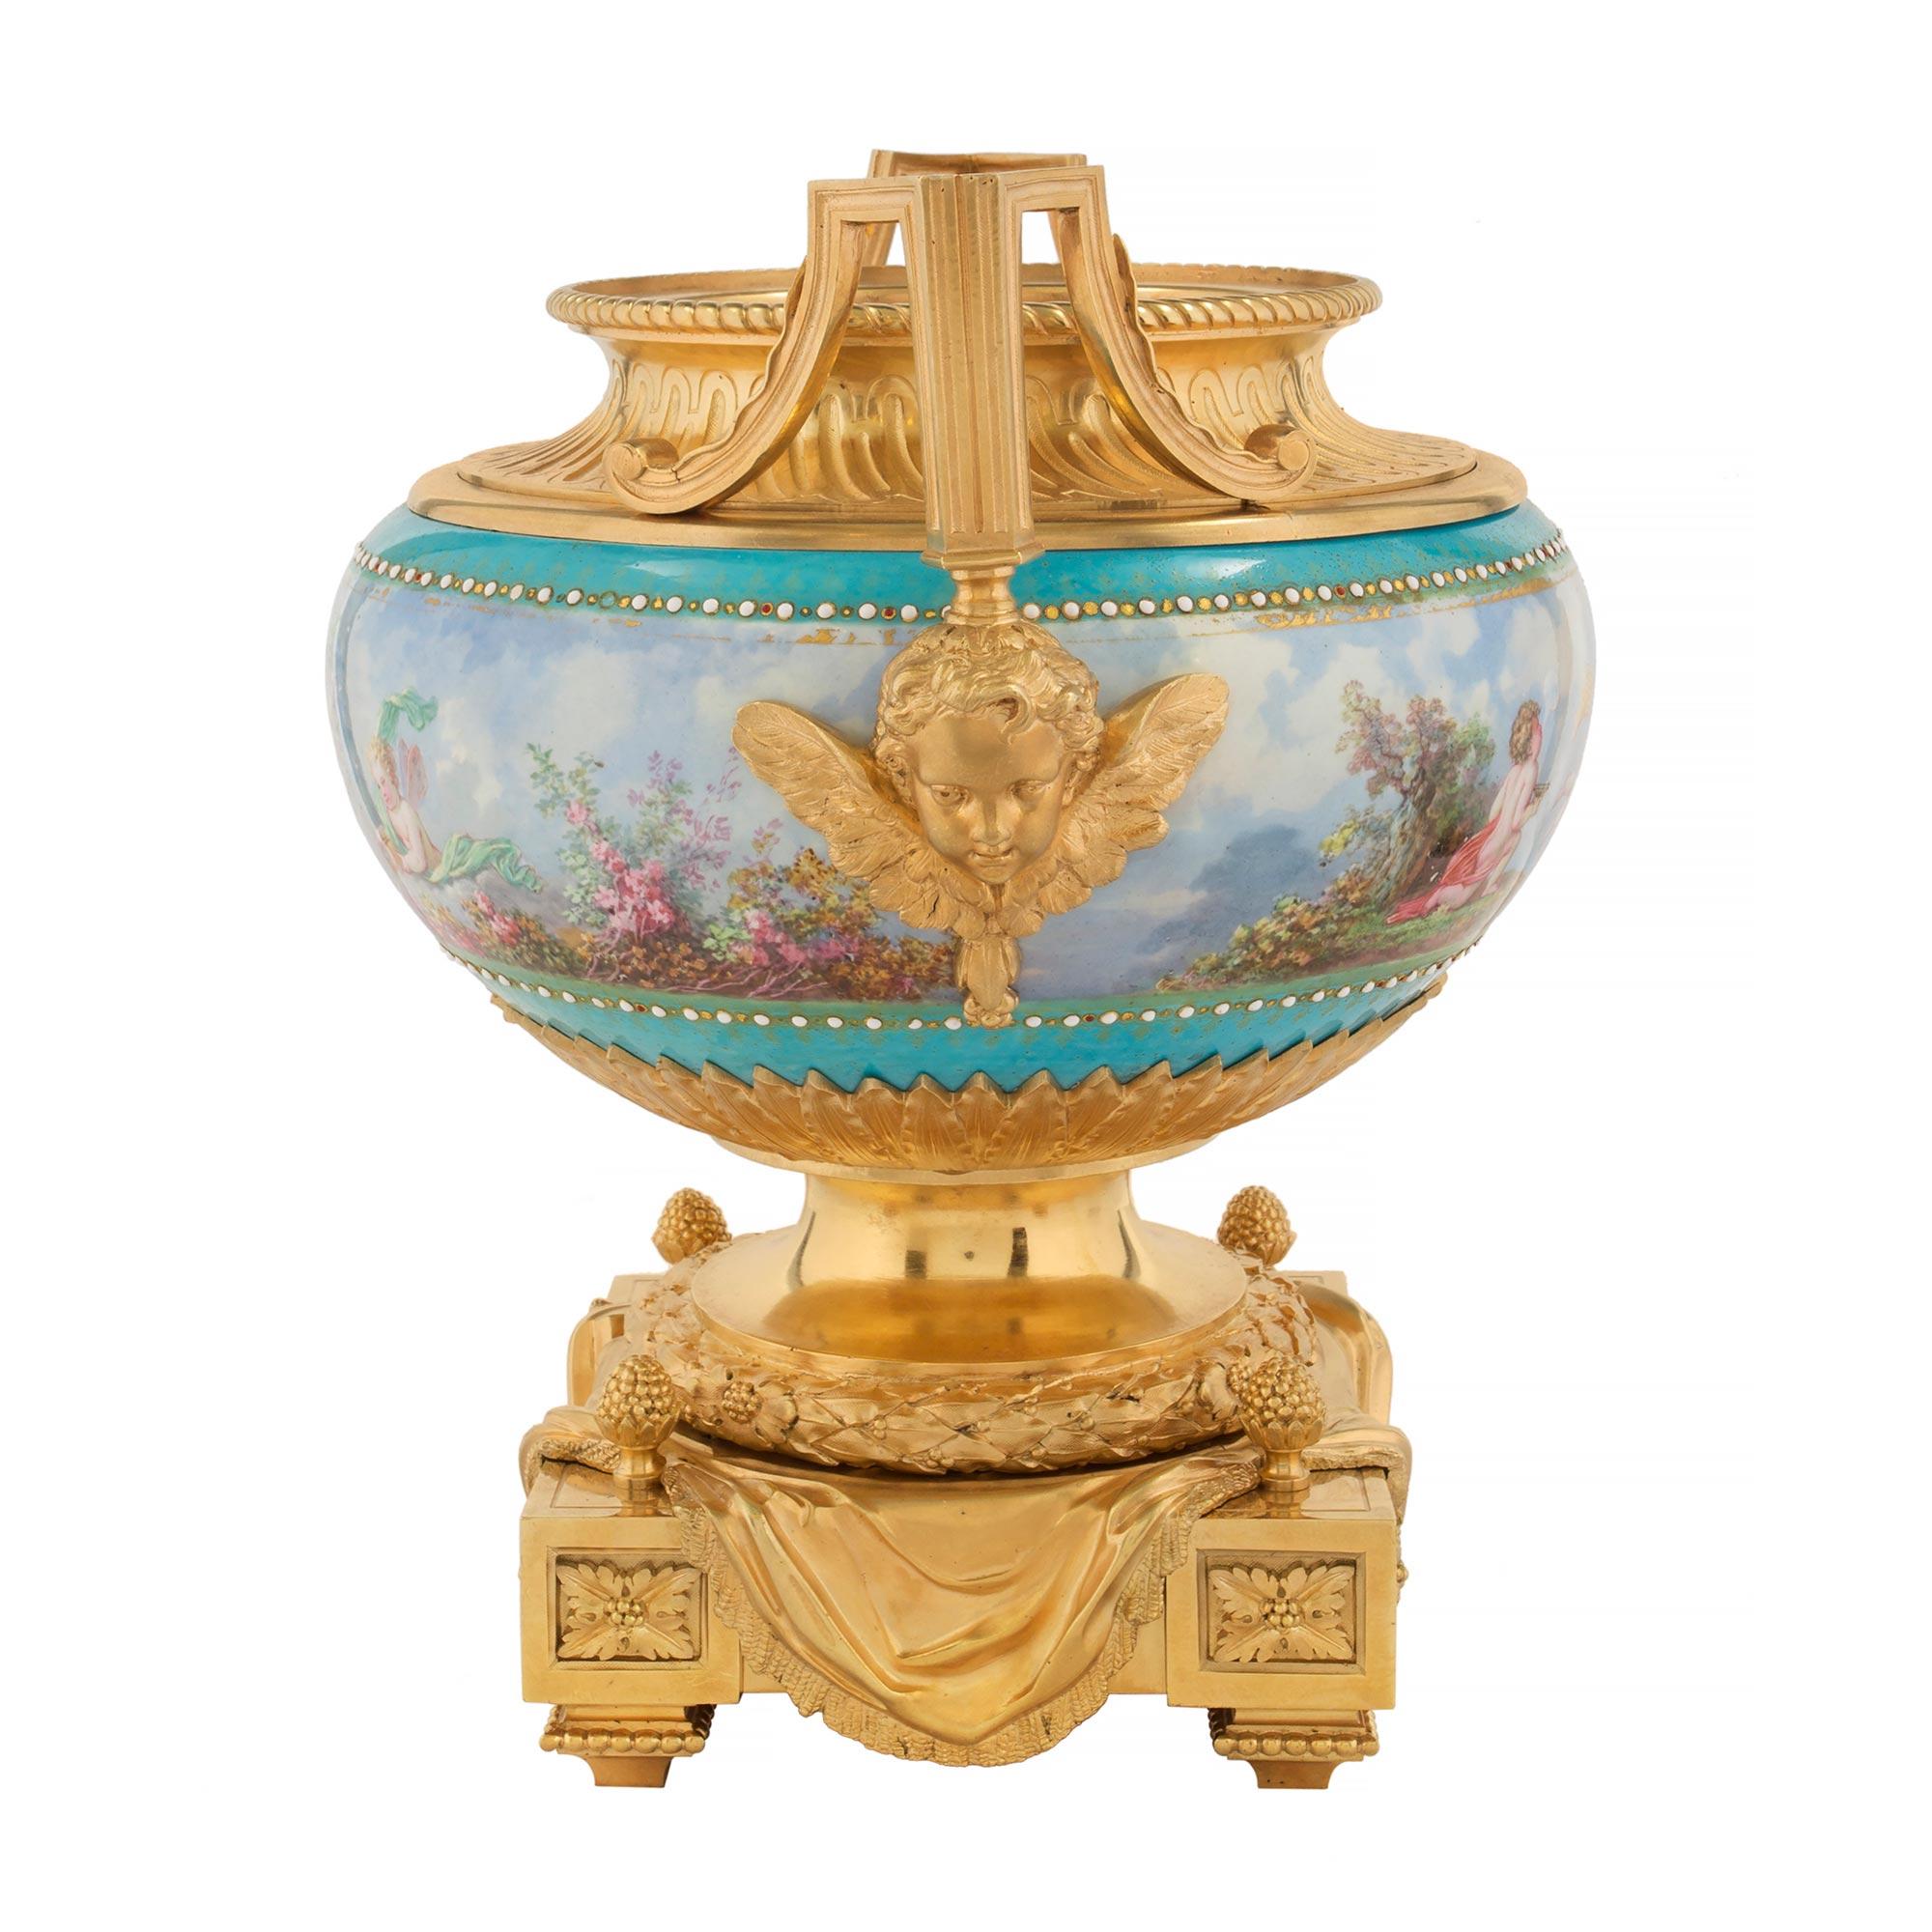 French 19th Century Louis XVI Style Ormolu and Enameled Porcelain Centerpiece For Sale 2